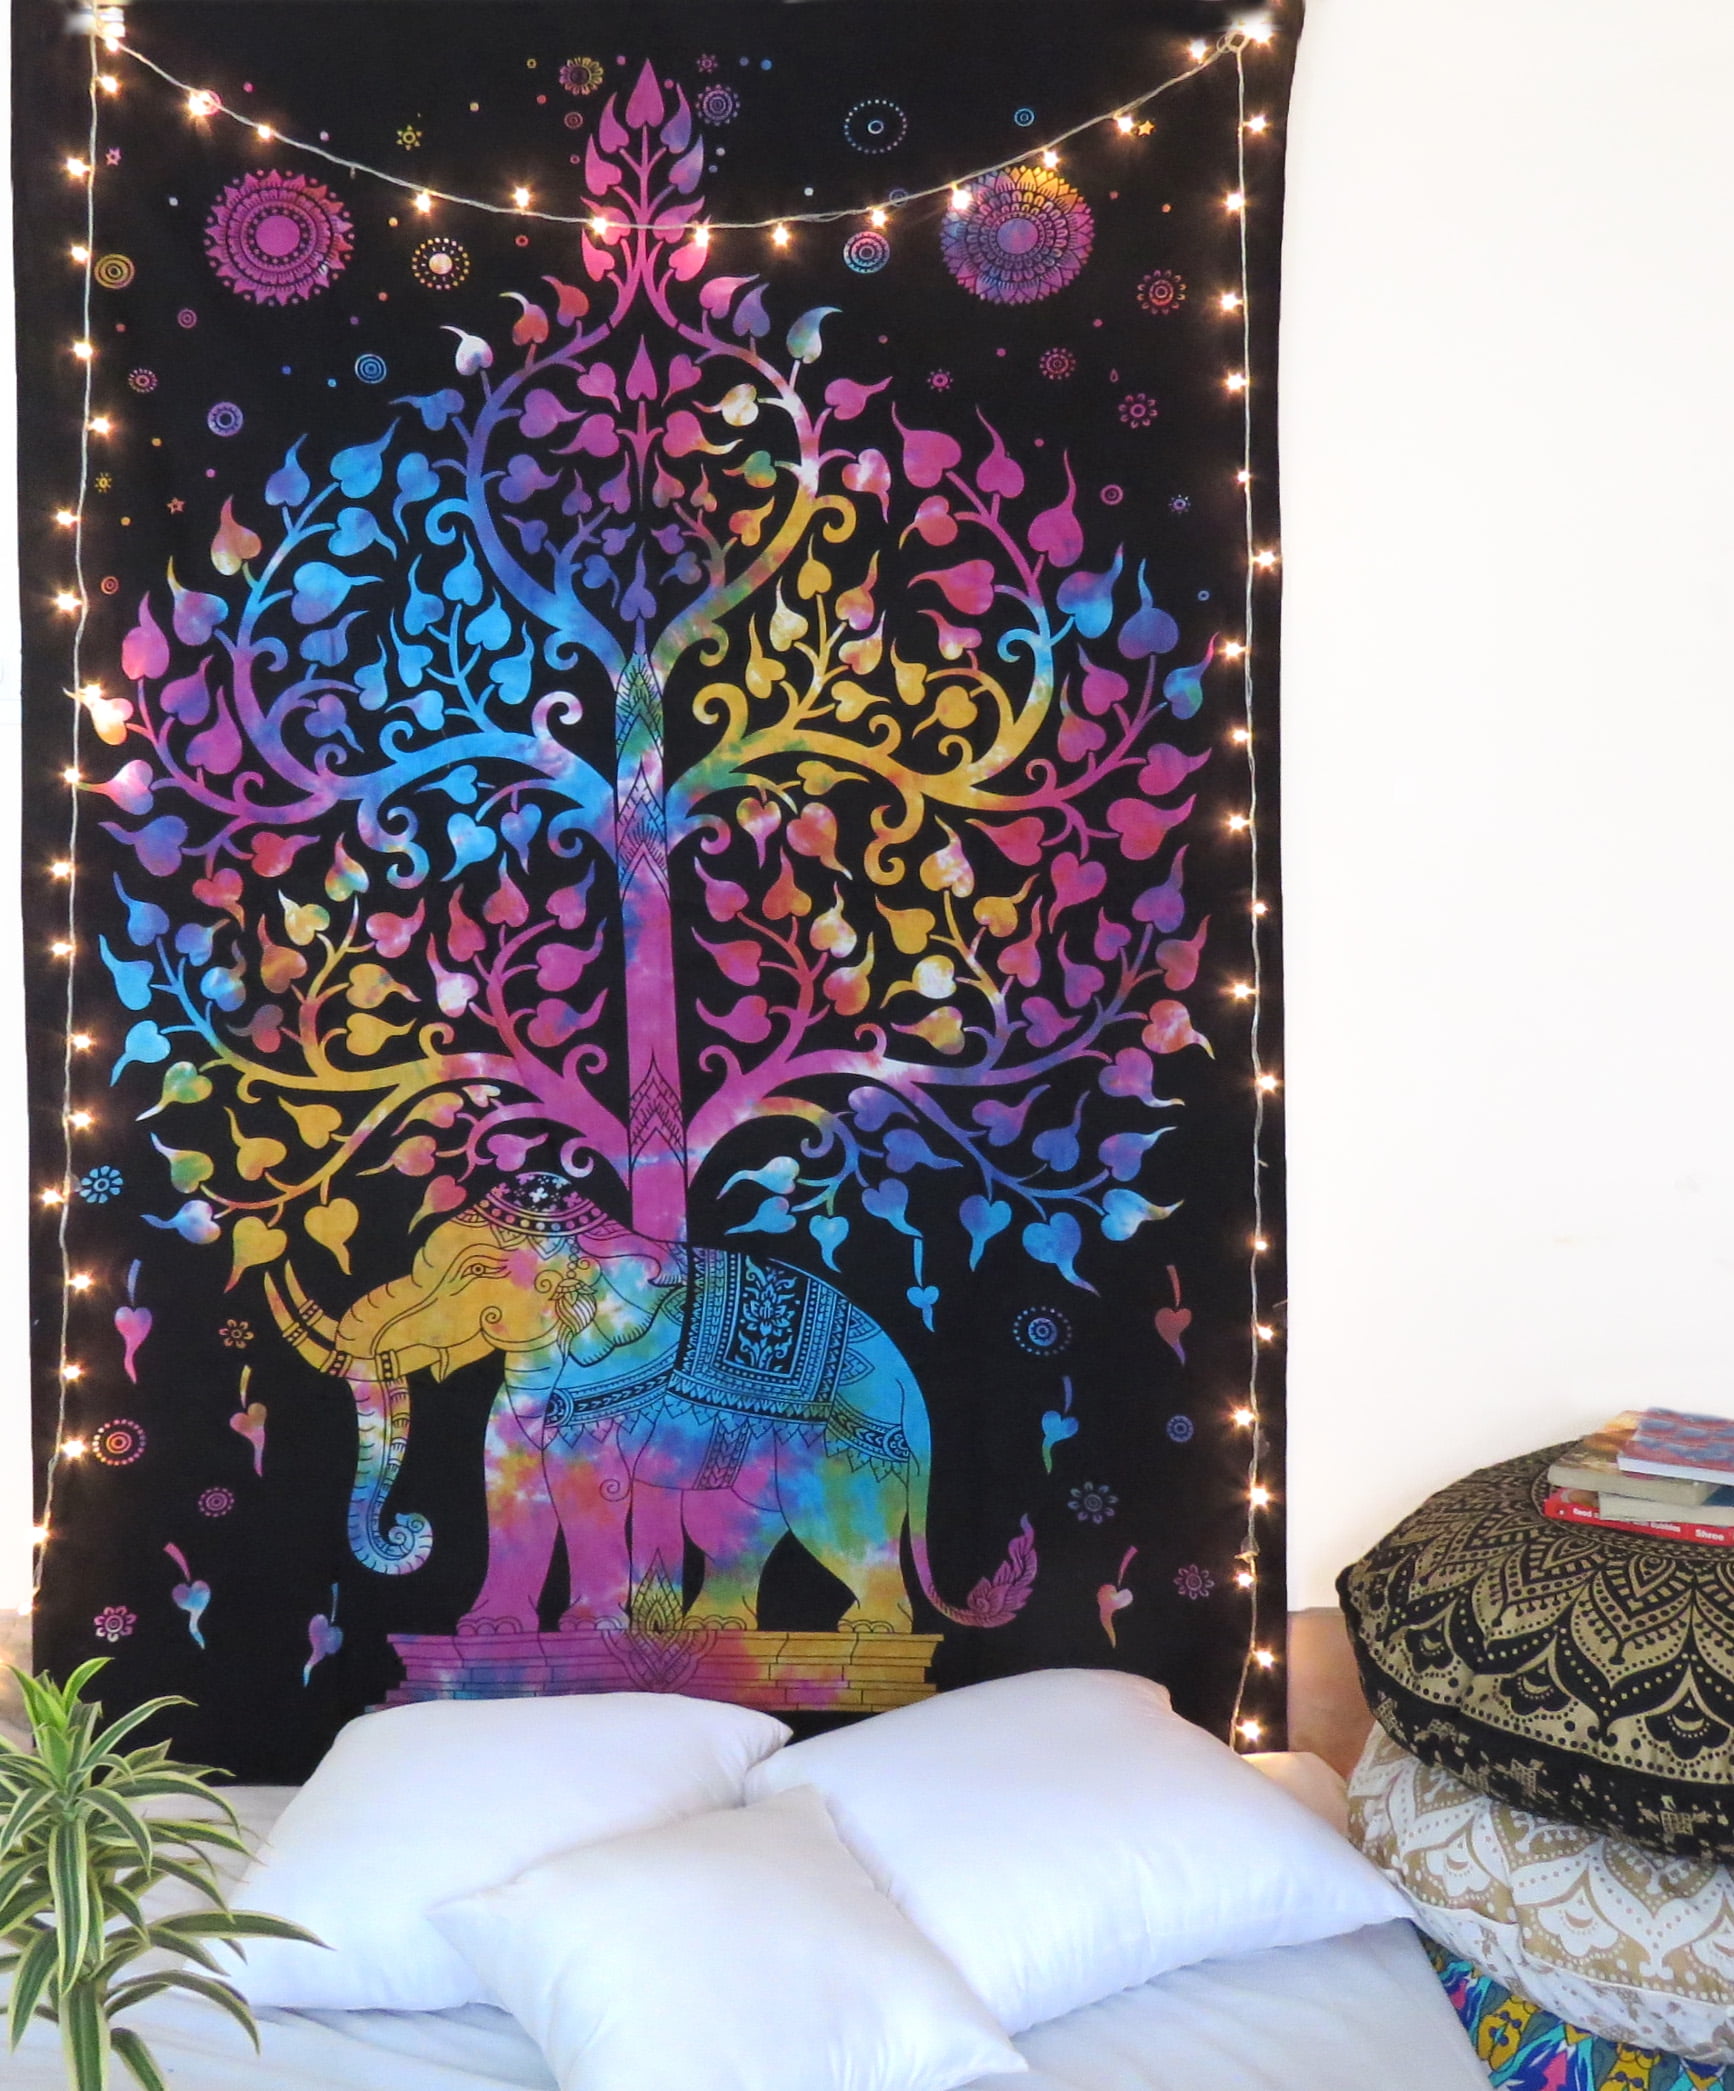 Indian Skull Tie Dye Wall Hanging Cotton Wall Tapestry Queen Bedding Throw Boho 